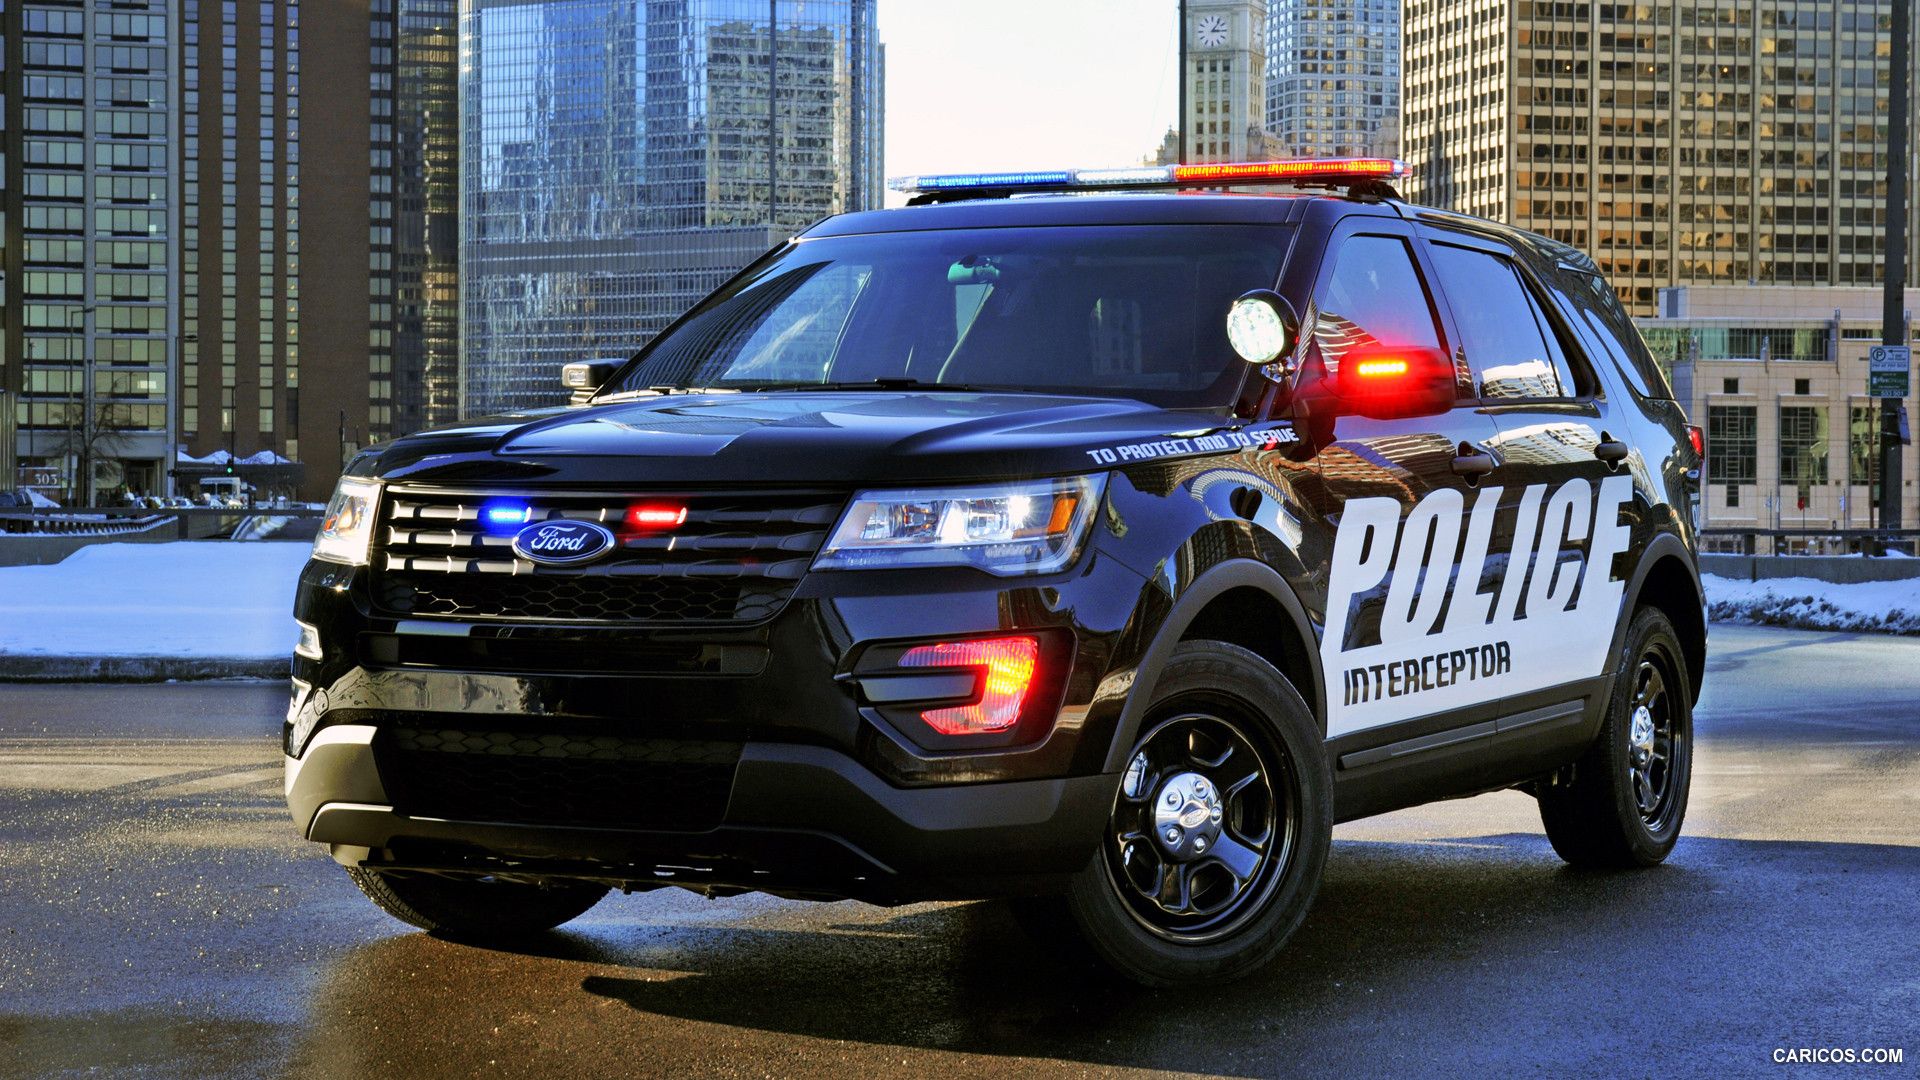 The 2016 Ford Interceptor SUV: A Technology Filled, Crime Fighting Machine